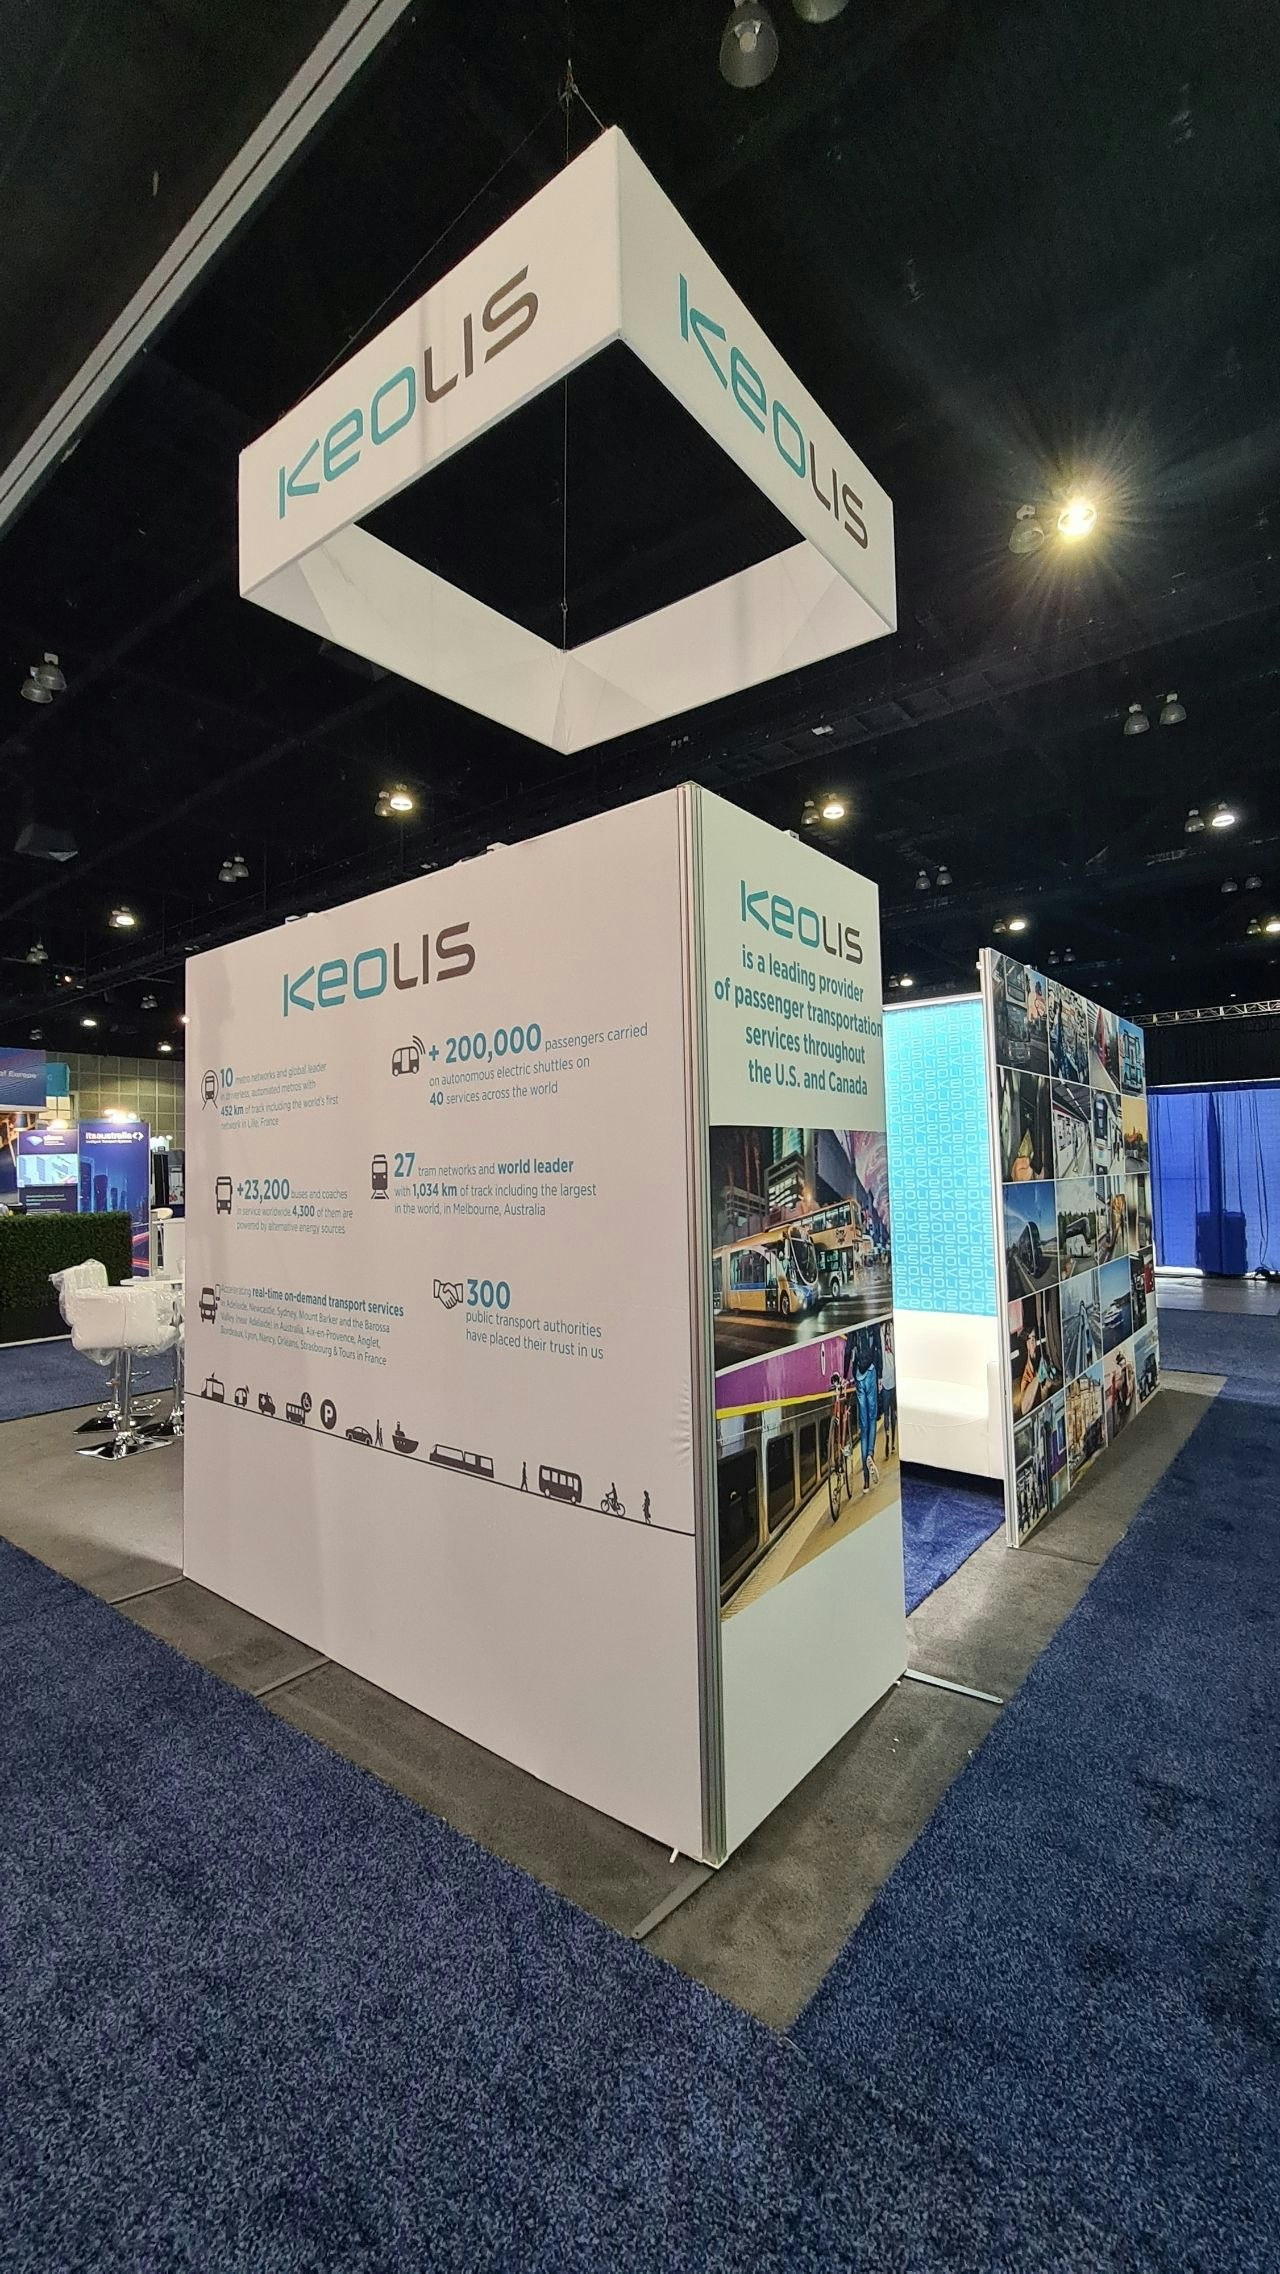 Keolis stand at the ITS World Congress 2022 in Los Angeles